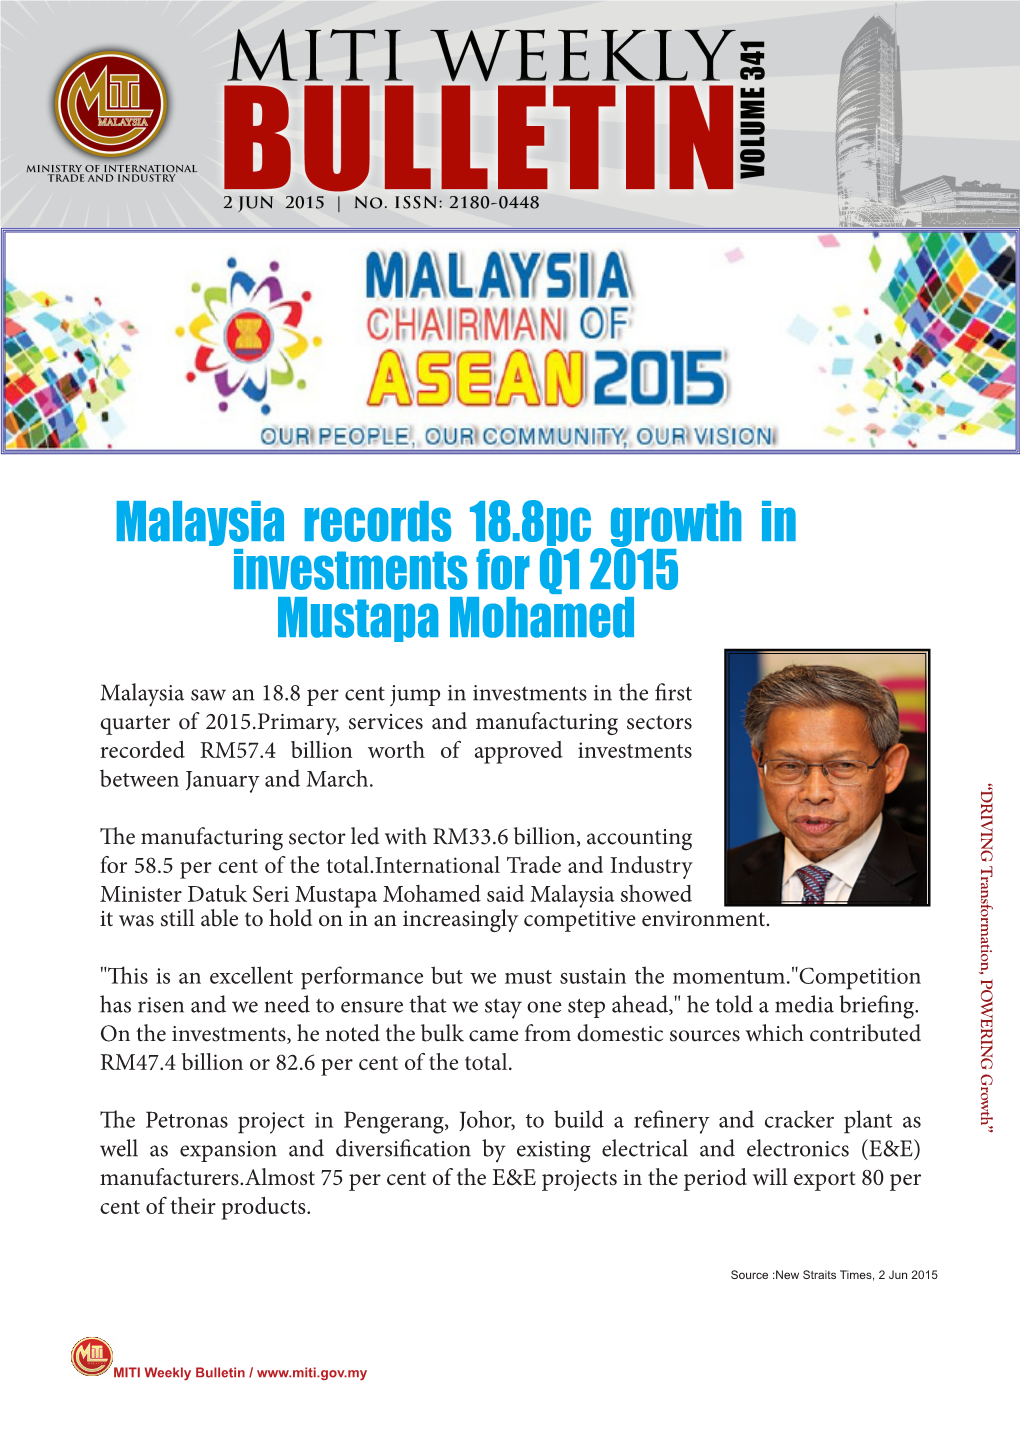 Malaysia Records 18.8Pc Growth in Investments for Q1 2015 Mustapa Mohamed